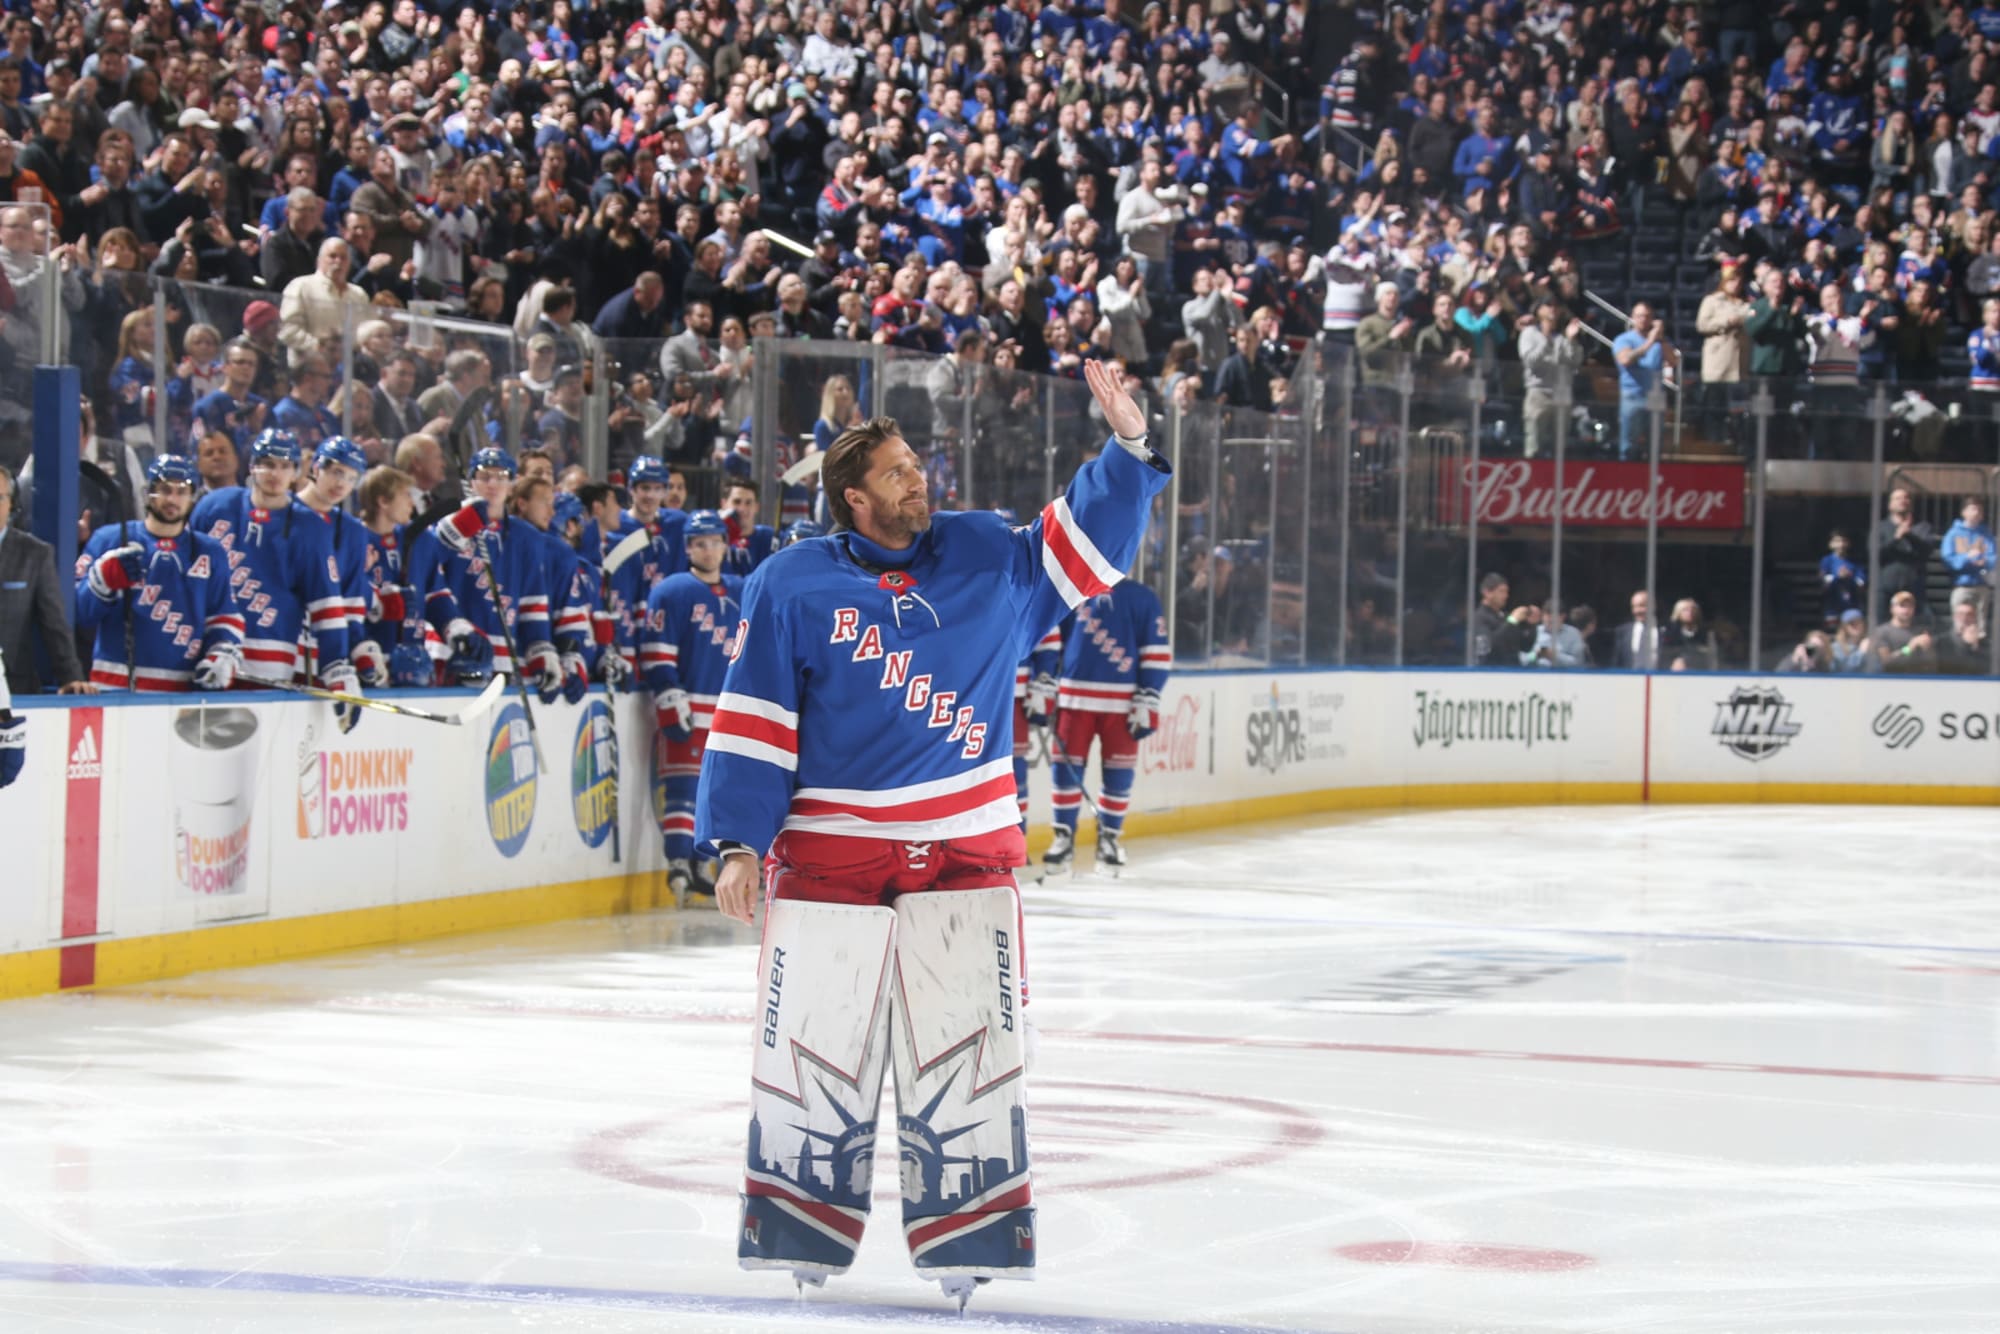 Henrik Lundqvist is uncertain about his future with the New York